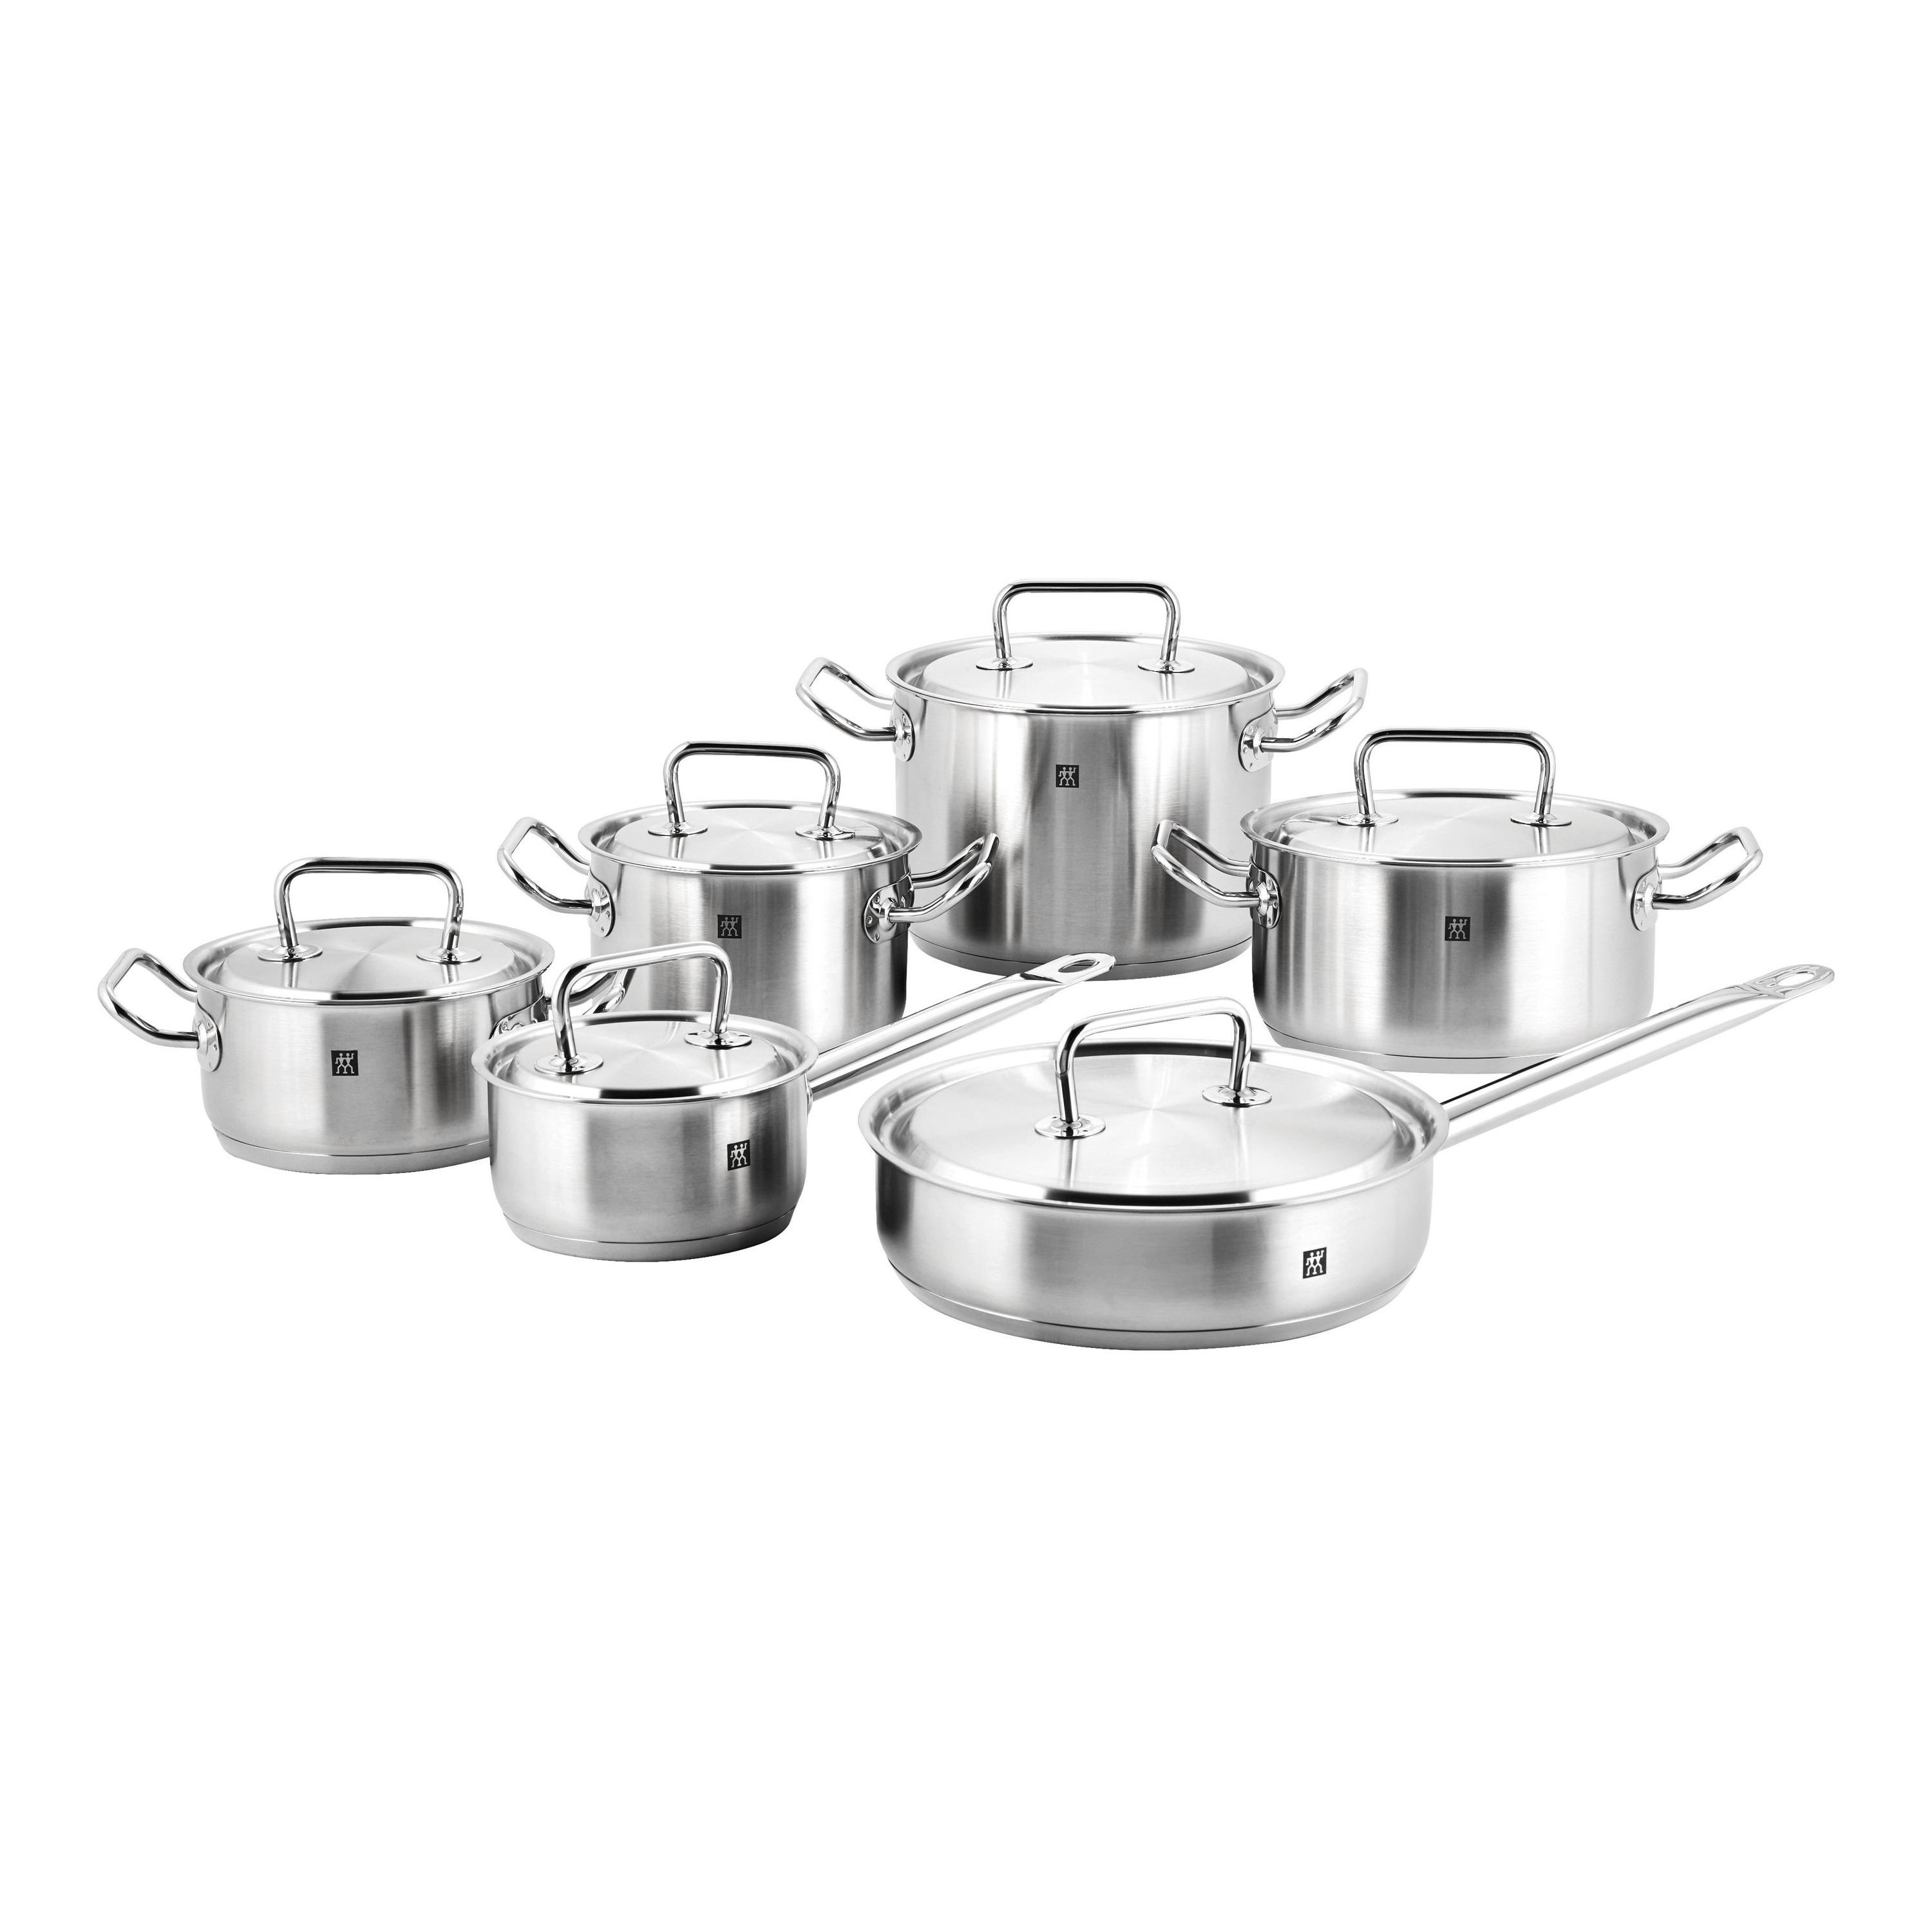 Zwilling Twin Classic, 9pc 18/10 brushed stainless steel cookware set -  Compreforce